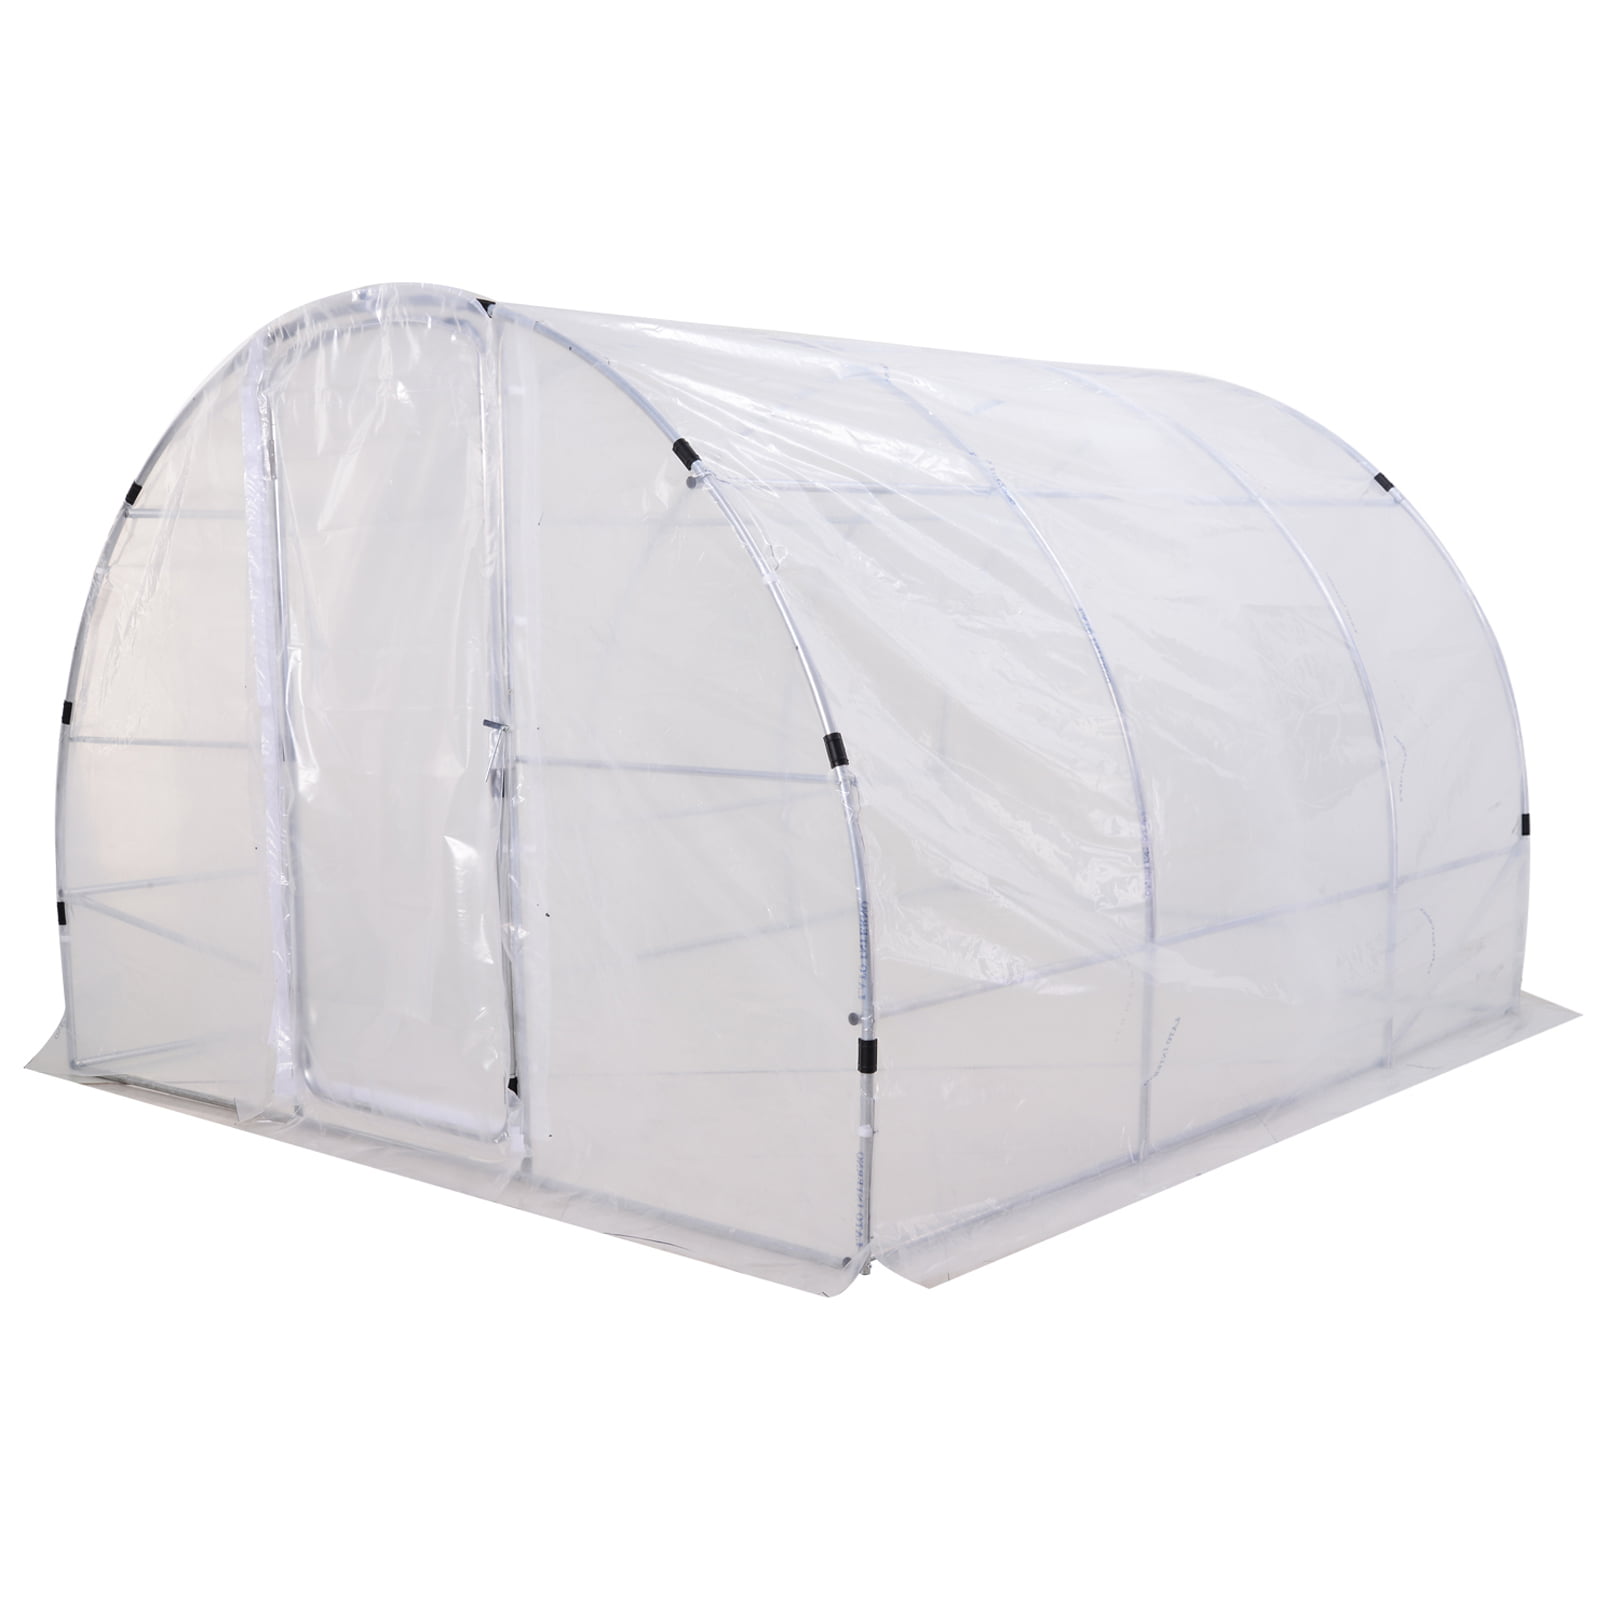 PE Cover Arched Walk-In Polytunnel Greenhouse Garden Tent w/Steel Frame 3m X 2m 